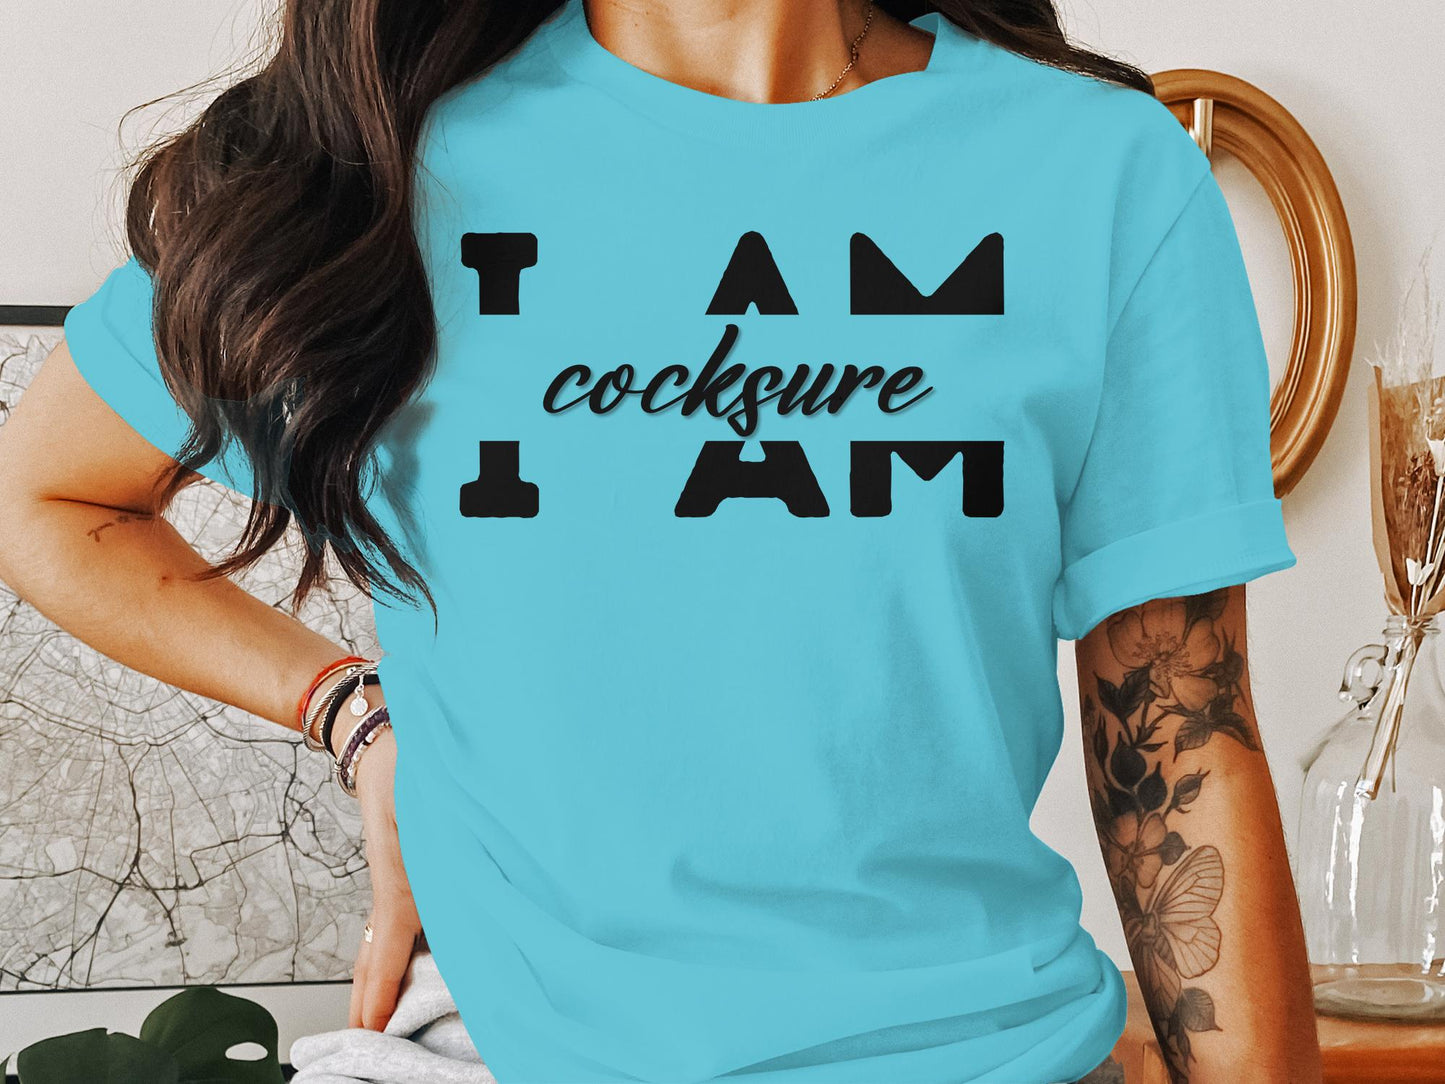 I Am Cocksure - Affirmation Quote Shirt - Encouraging and Motivating